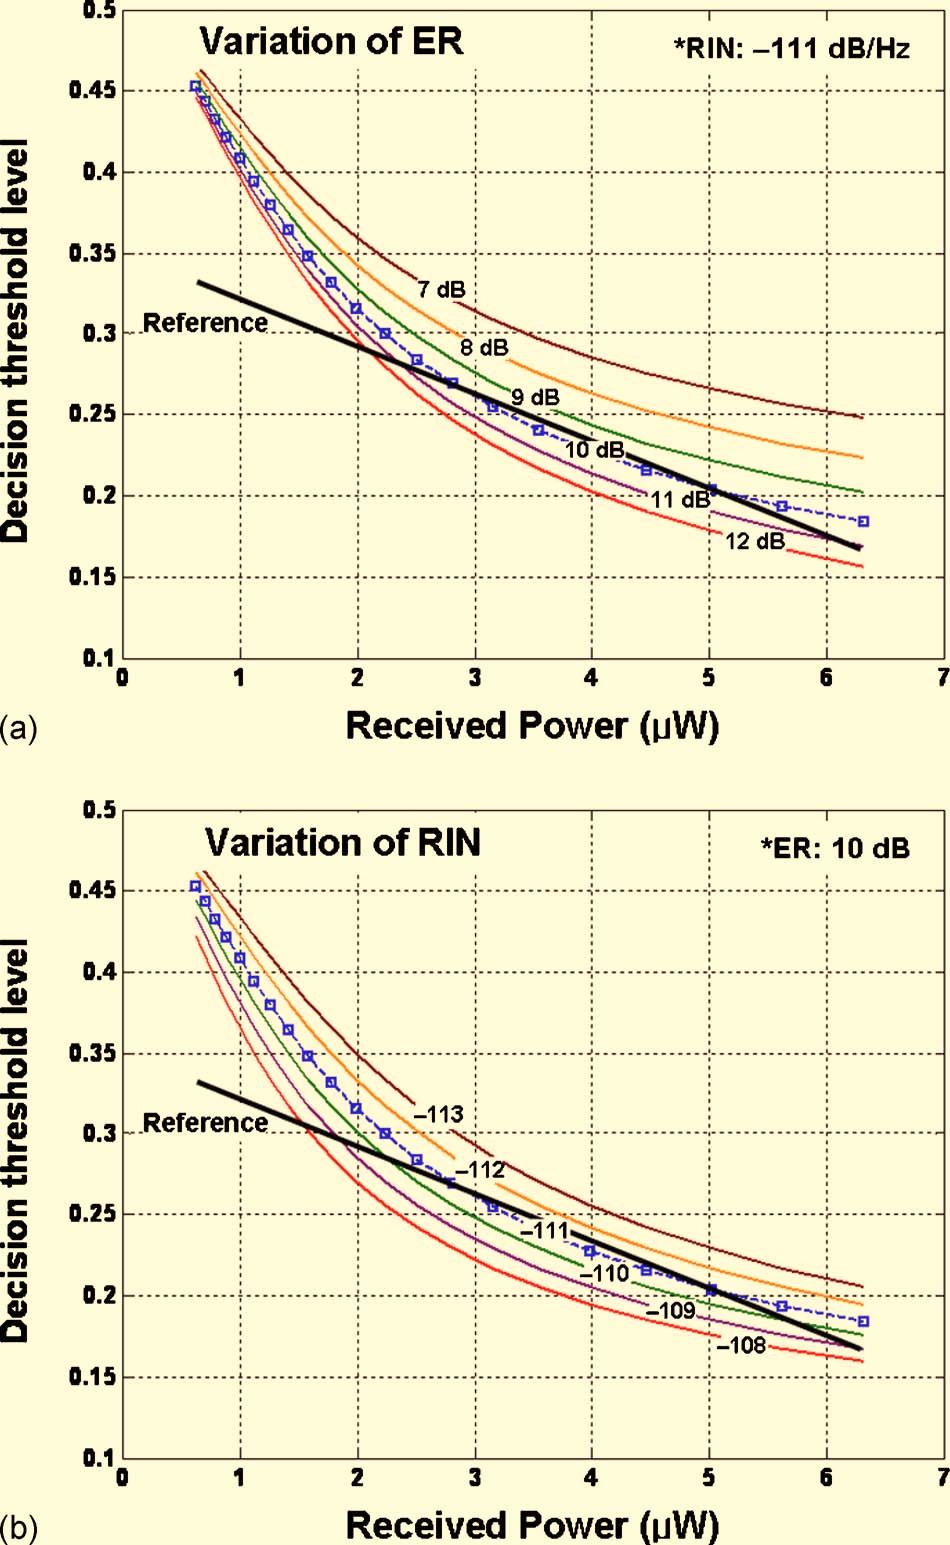 As shown in Section II, the optimum decision threshold level is changed according to the average received power and the input signal conditions (such as RIN or ER).